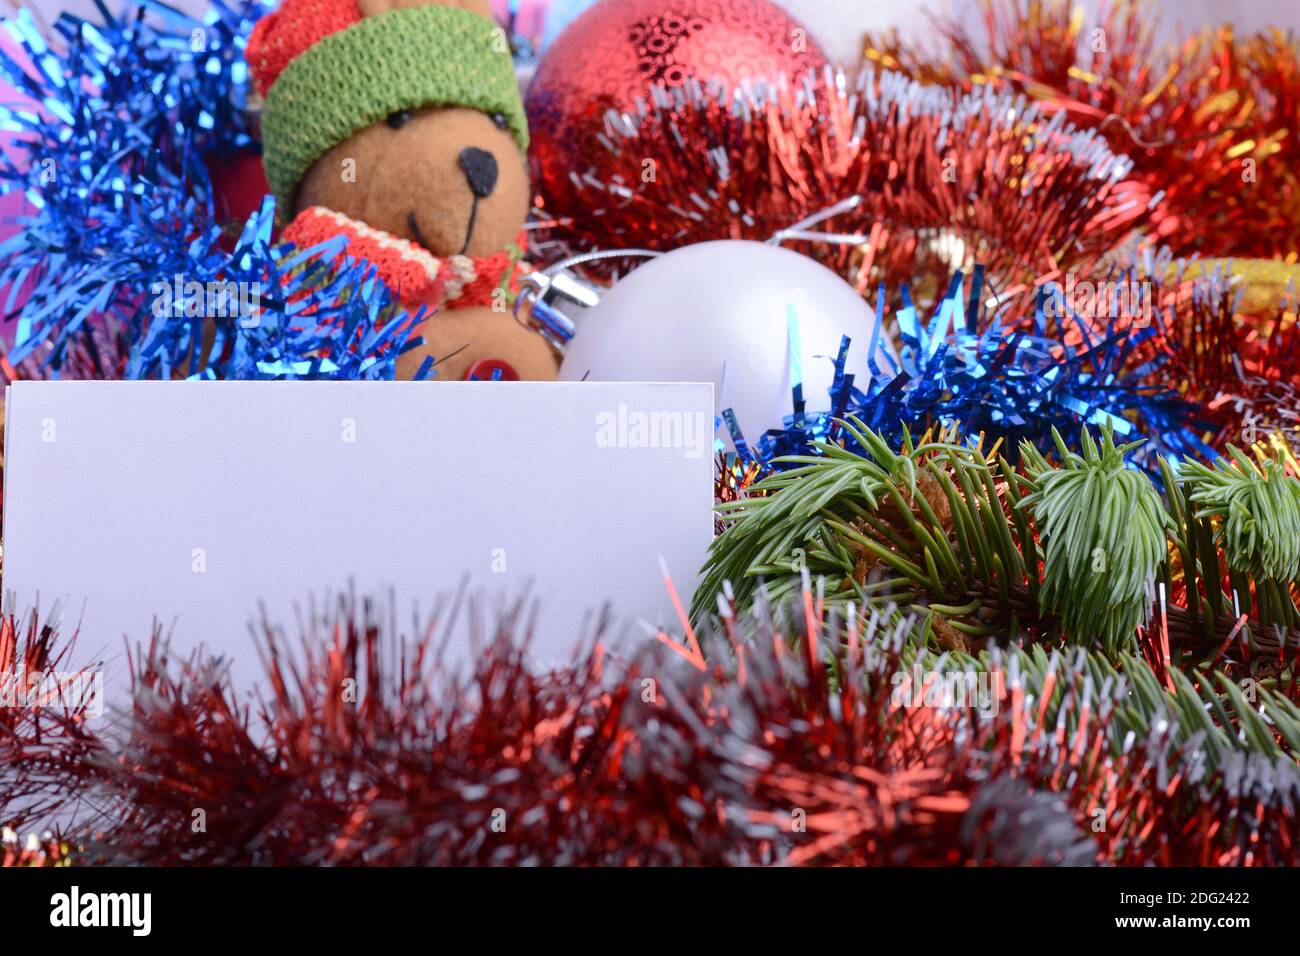 2021 Happy New Year and Christmas card with Teddy Bear, Balls and Gifts. New year and Christmas invitation background. Stock Photo